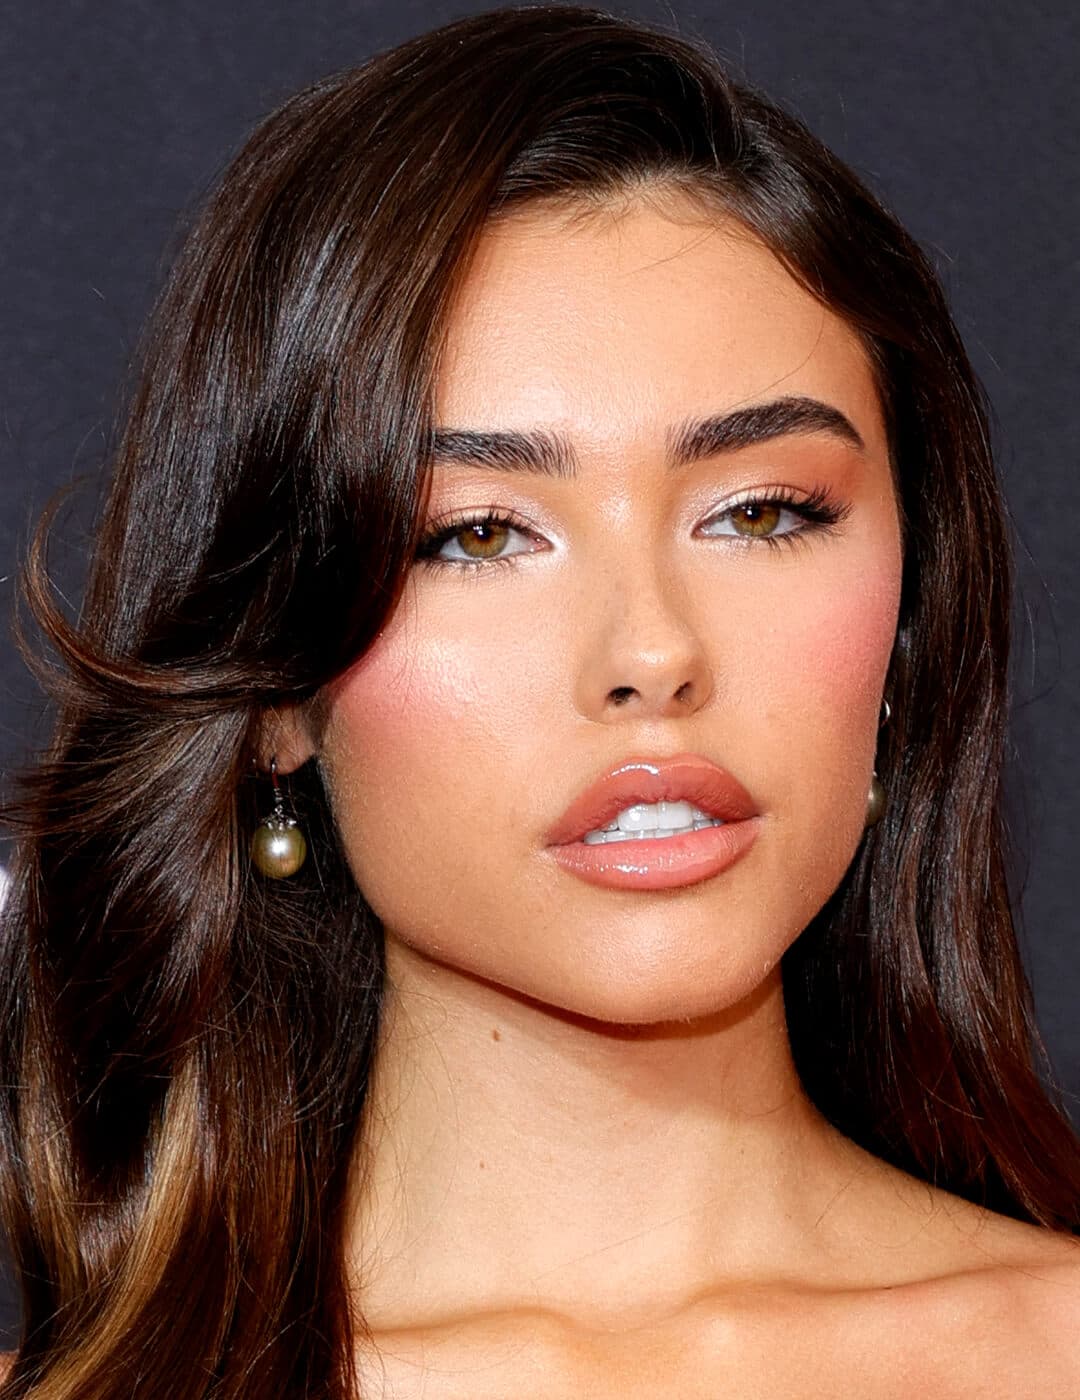 Madison Beer looking sultry in a pearlescent eyeshadow makeup look and glossy nude lips